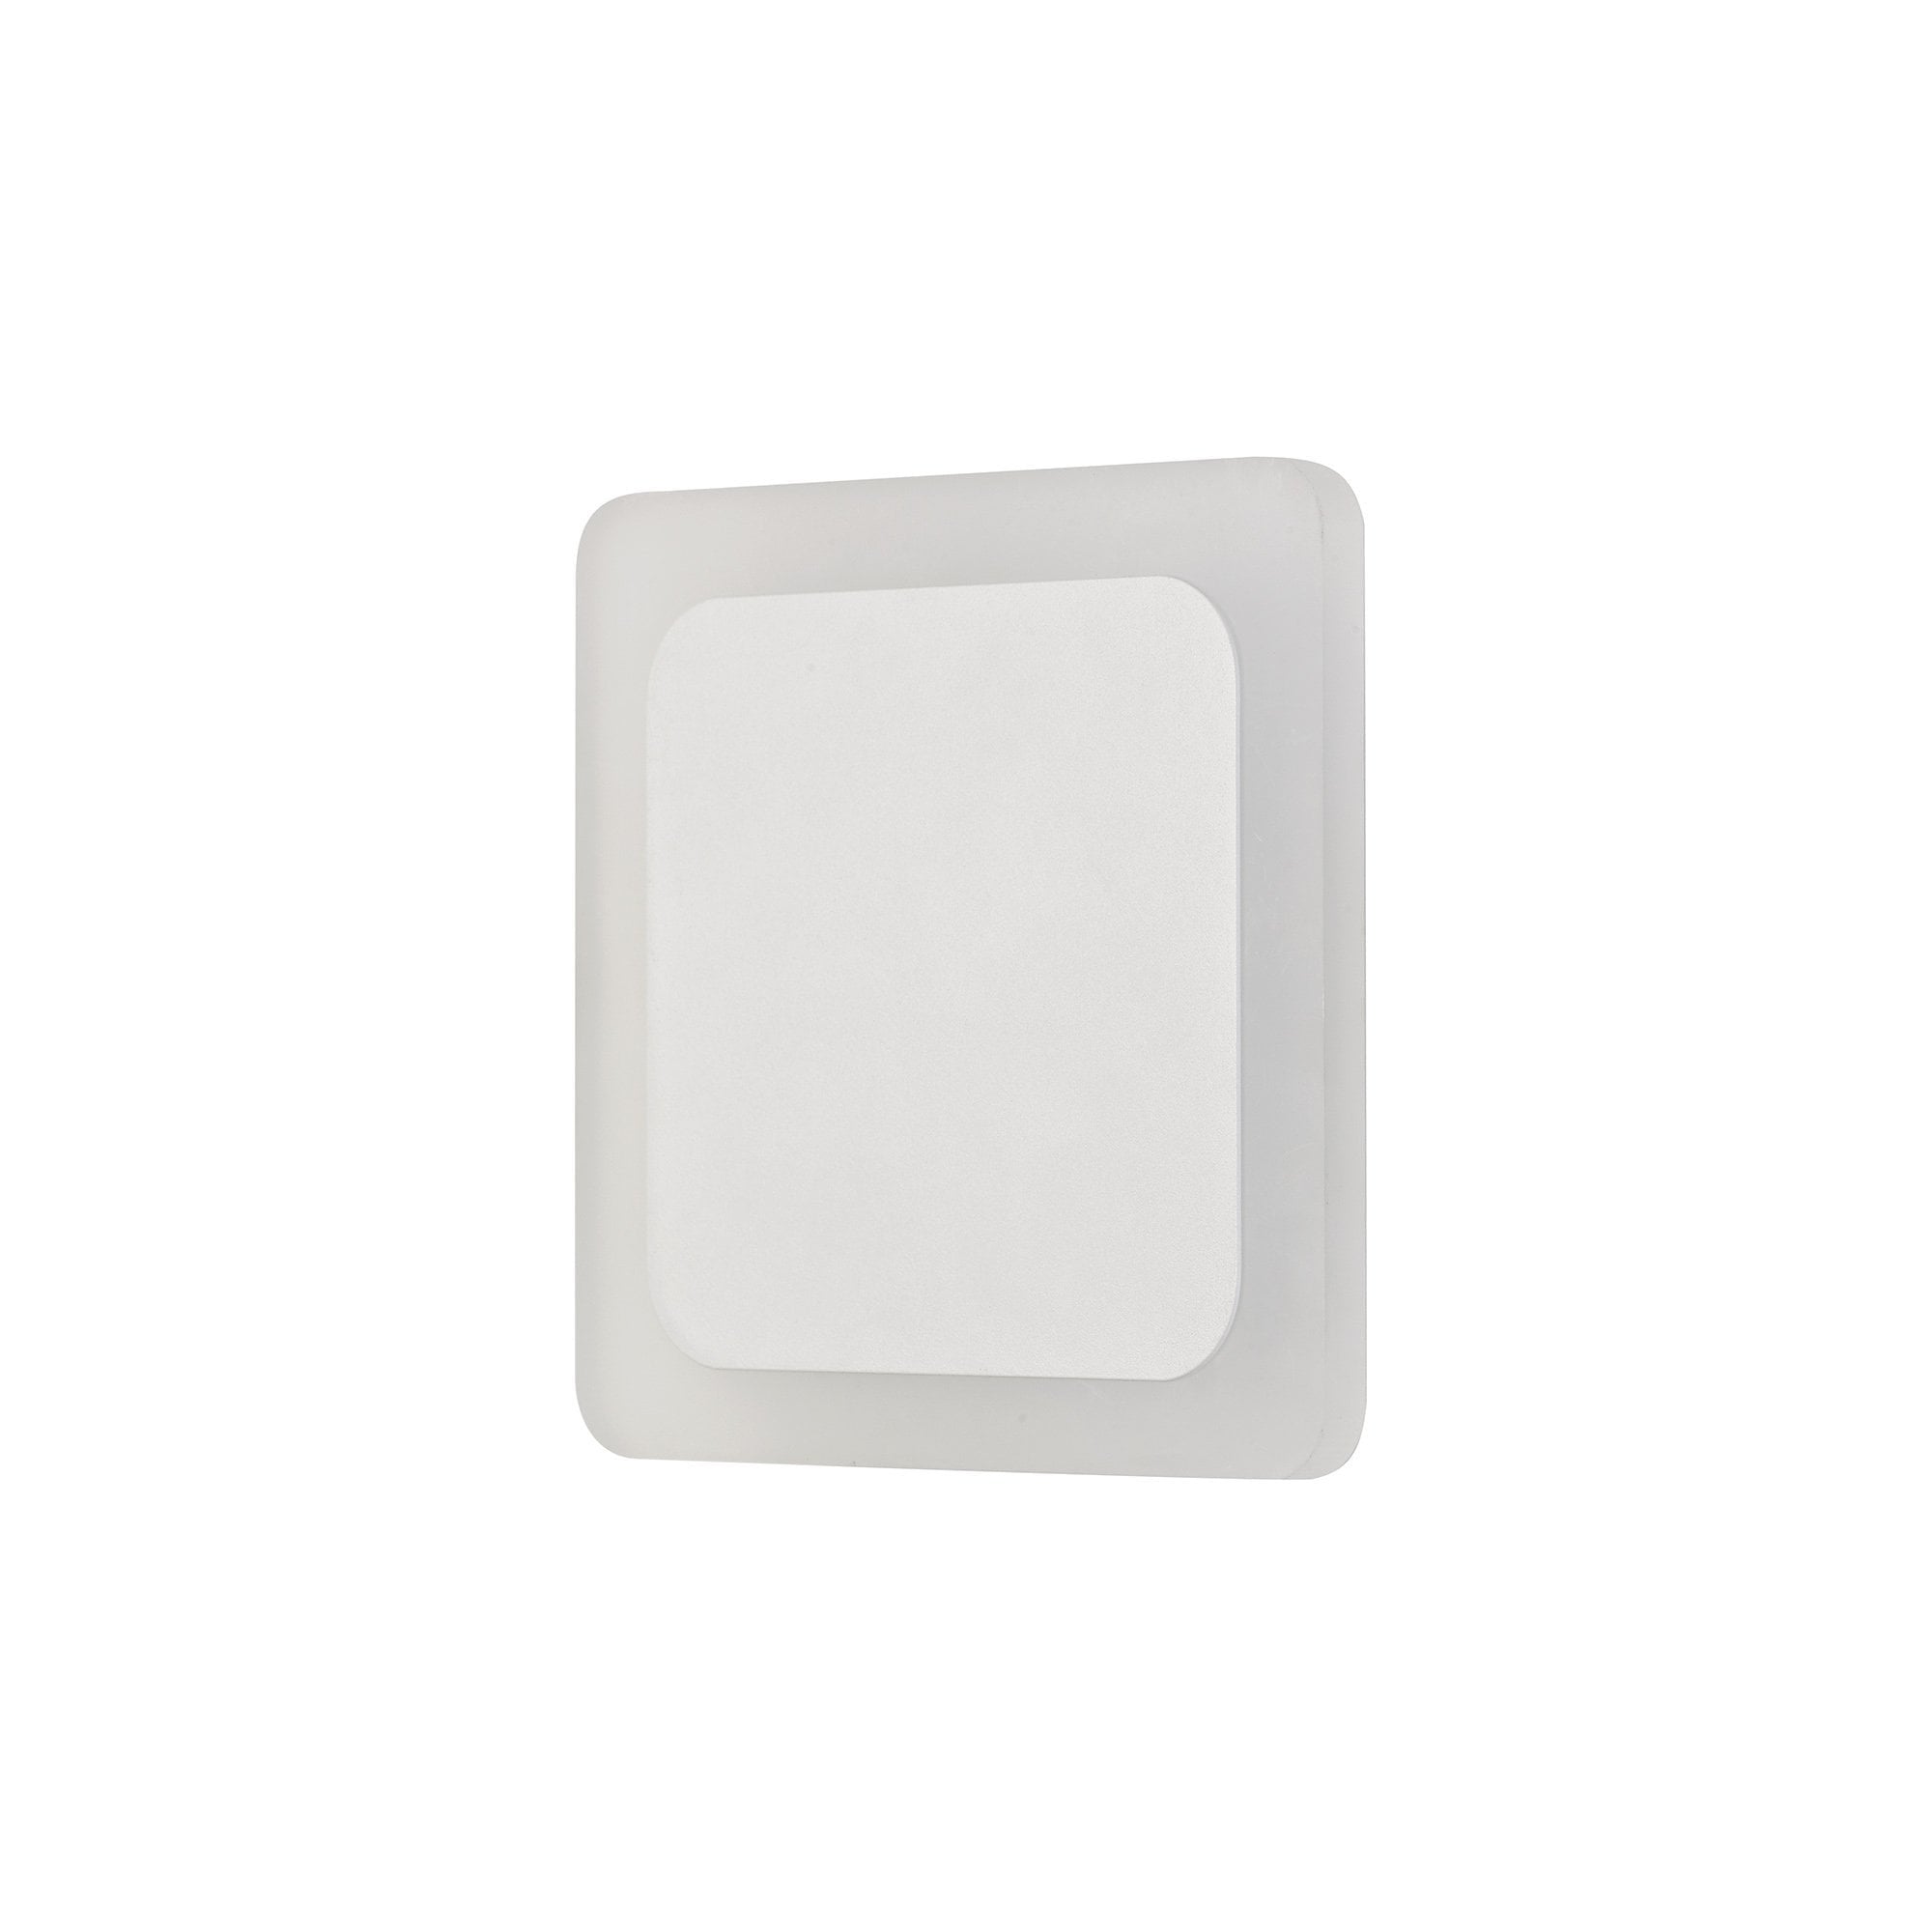 Magnetic Base Wall Lamp, 12W LED 3000K 498lm, 15/19cm Square Centre, Sand White/Acrylic Frosted Diffuser